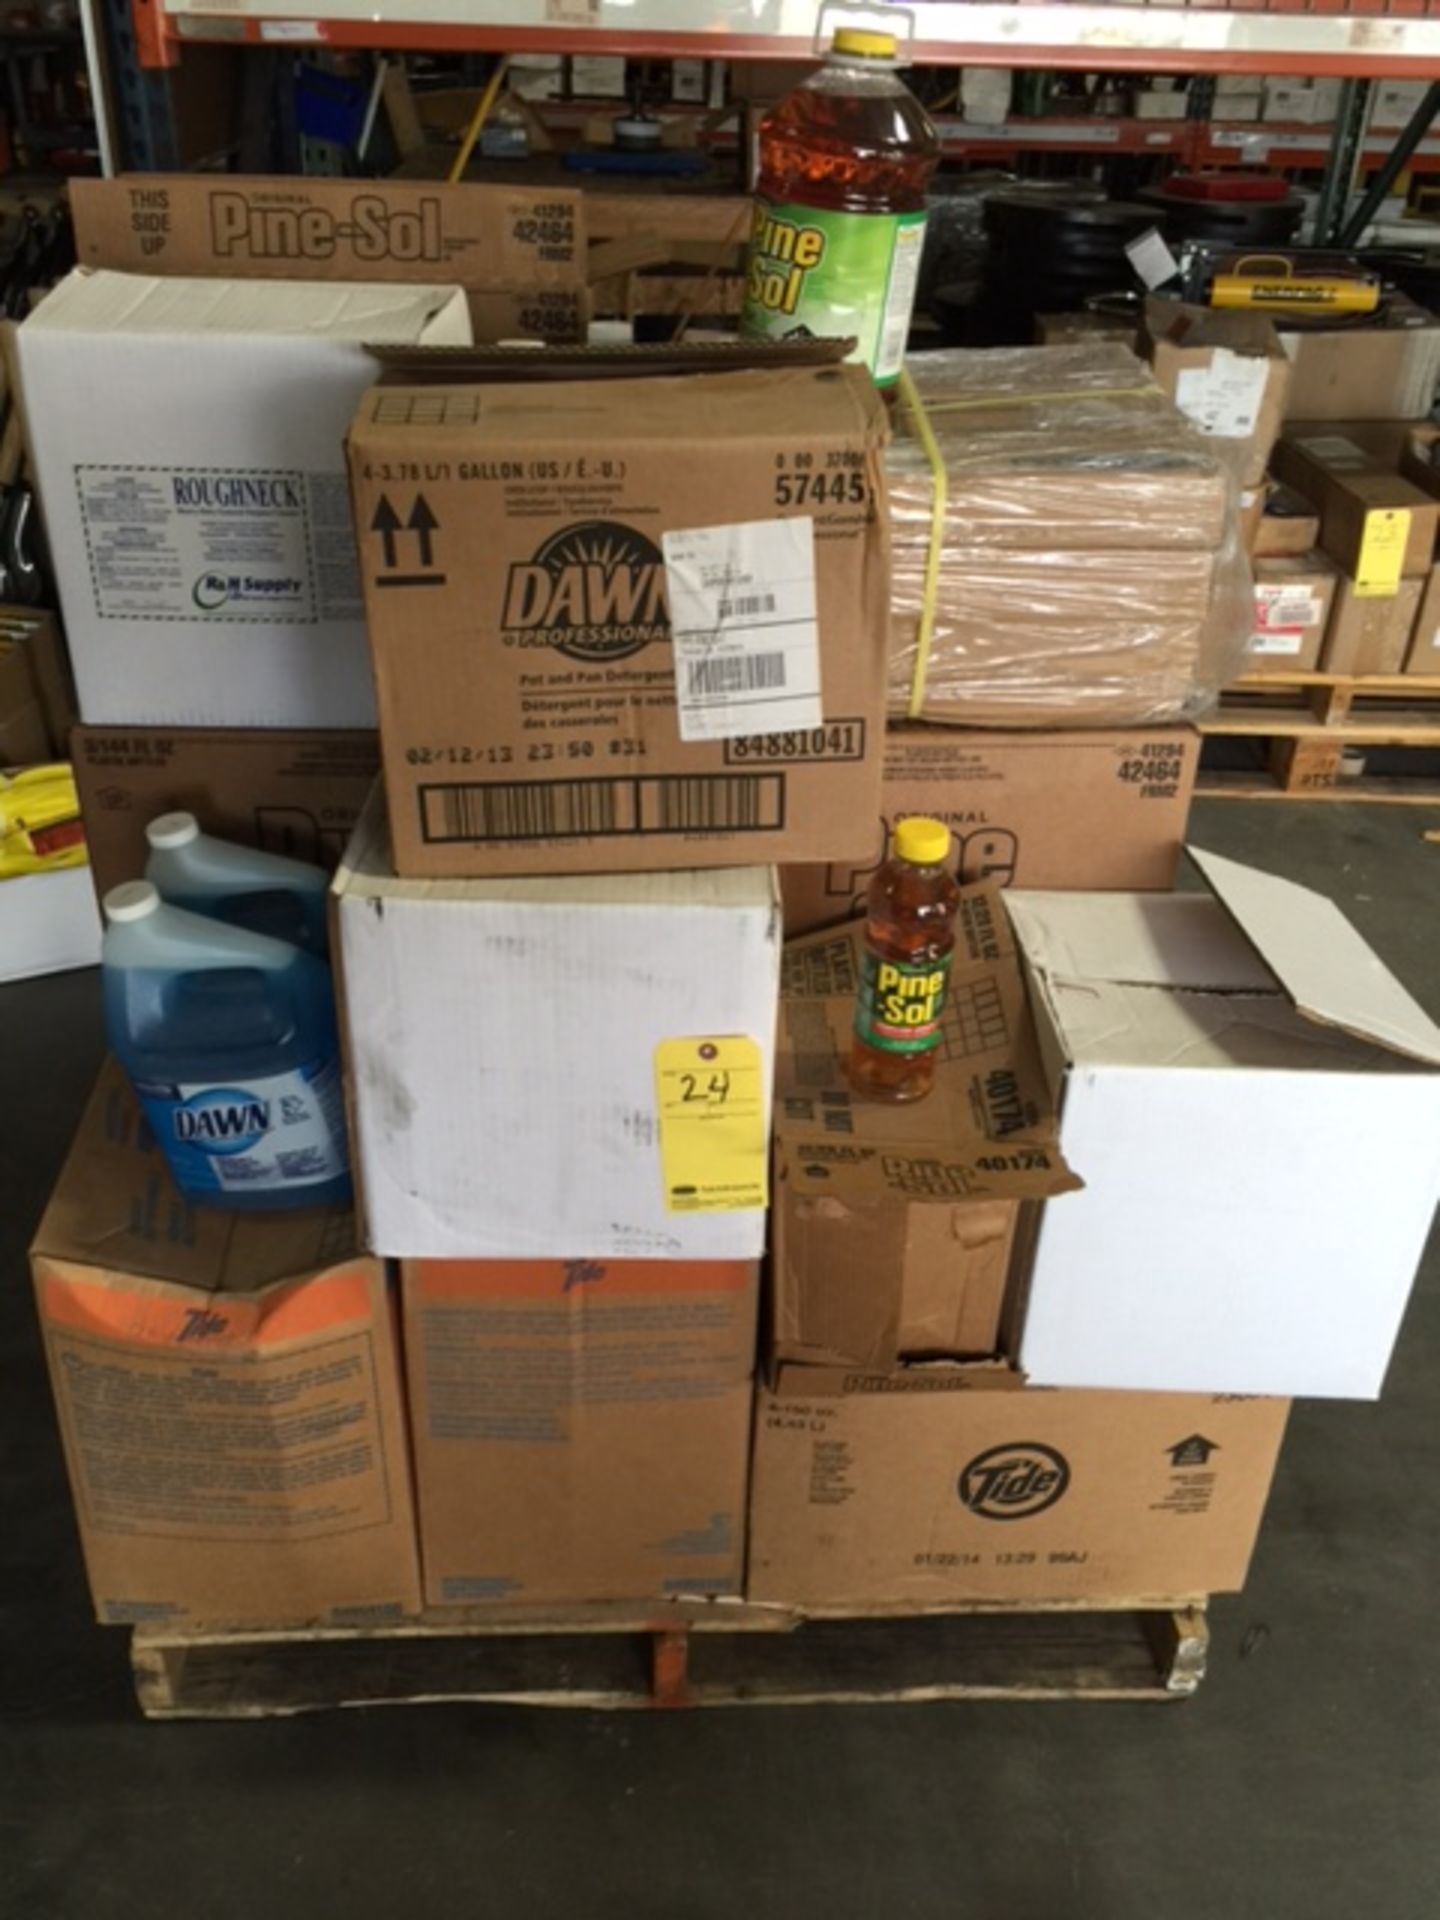 LOT OF CLEANING SUPPLIES: Pine-Sol, Tide & Dawn detergent  LOCATED IN HOUSTON, TX